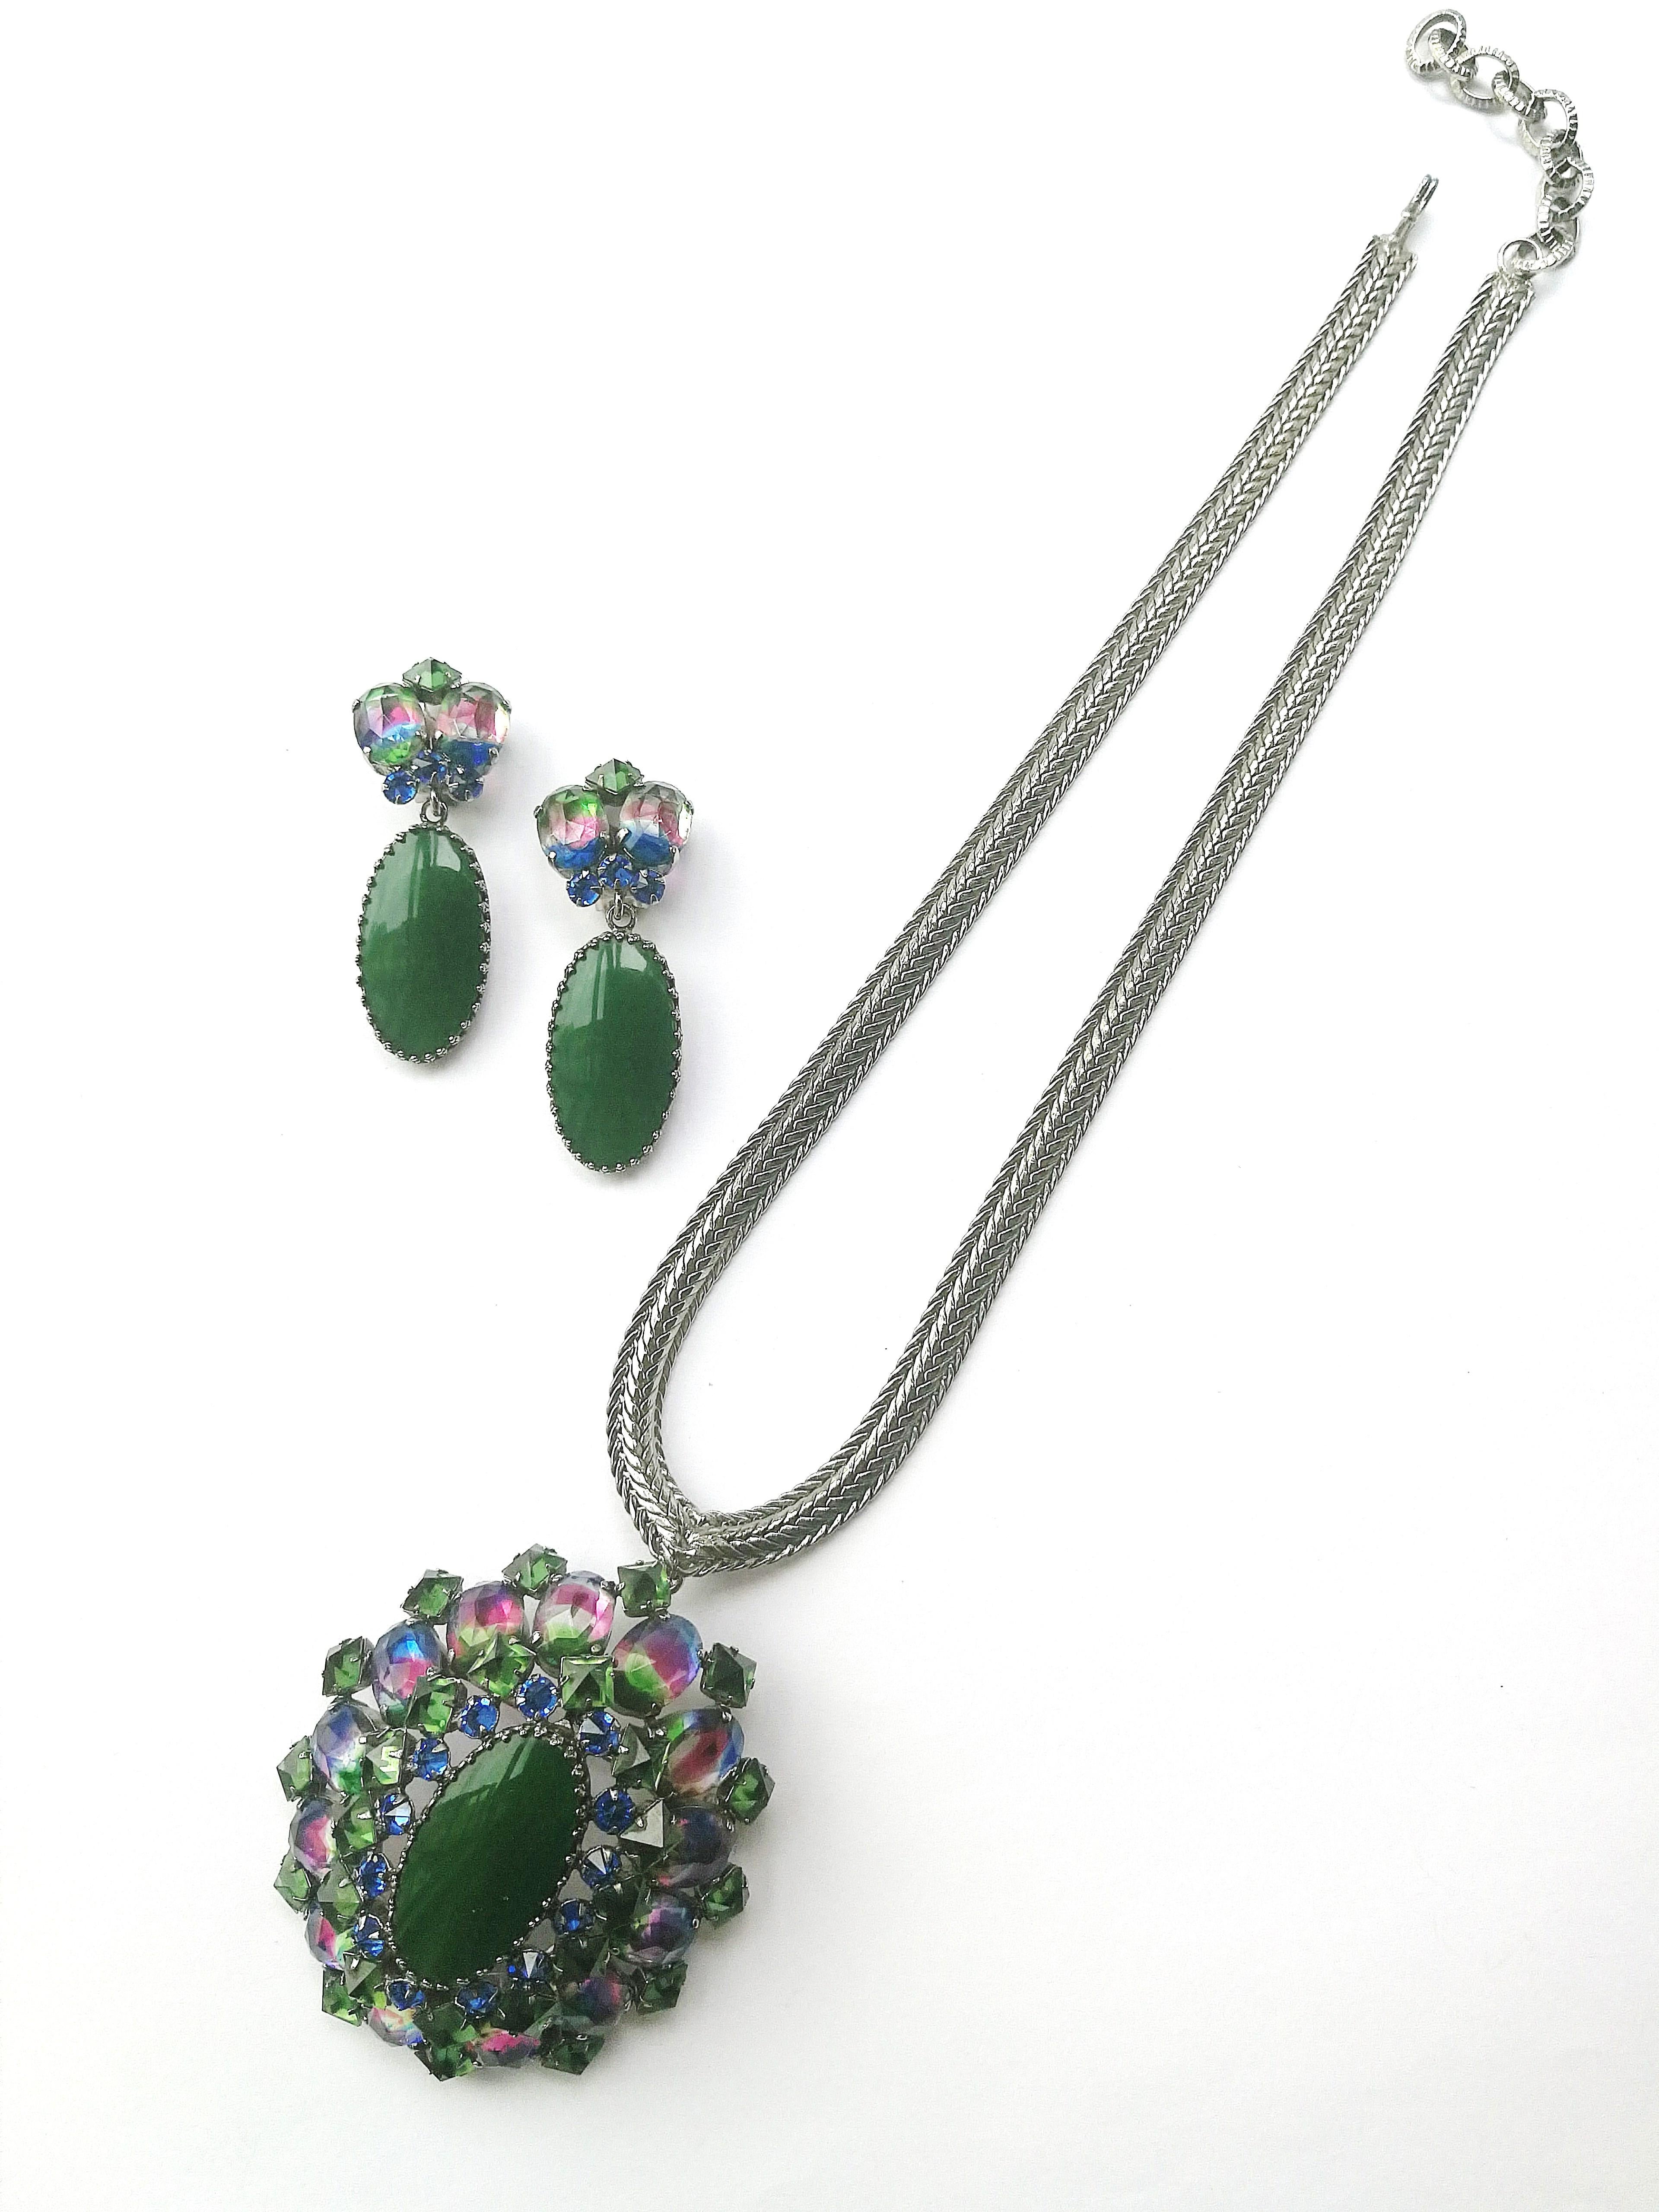 A very versatile set from Schreiner of New York, the height of 1960s glamour and sophistication. A beautiful domed brooch with characteristic square upturned emerald pastes, and rainbow coloured pastes, topped by a green glass oval in the centre,